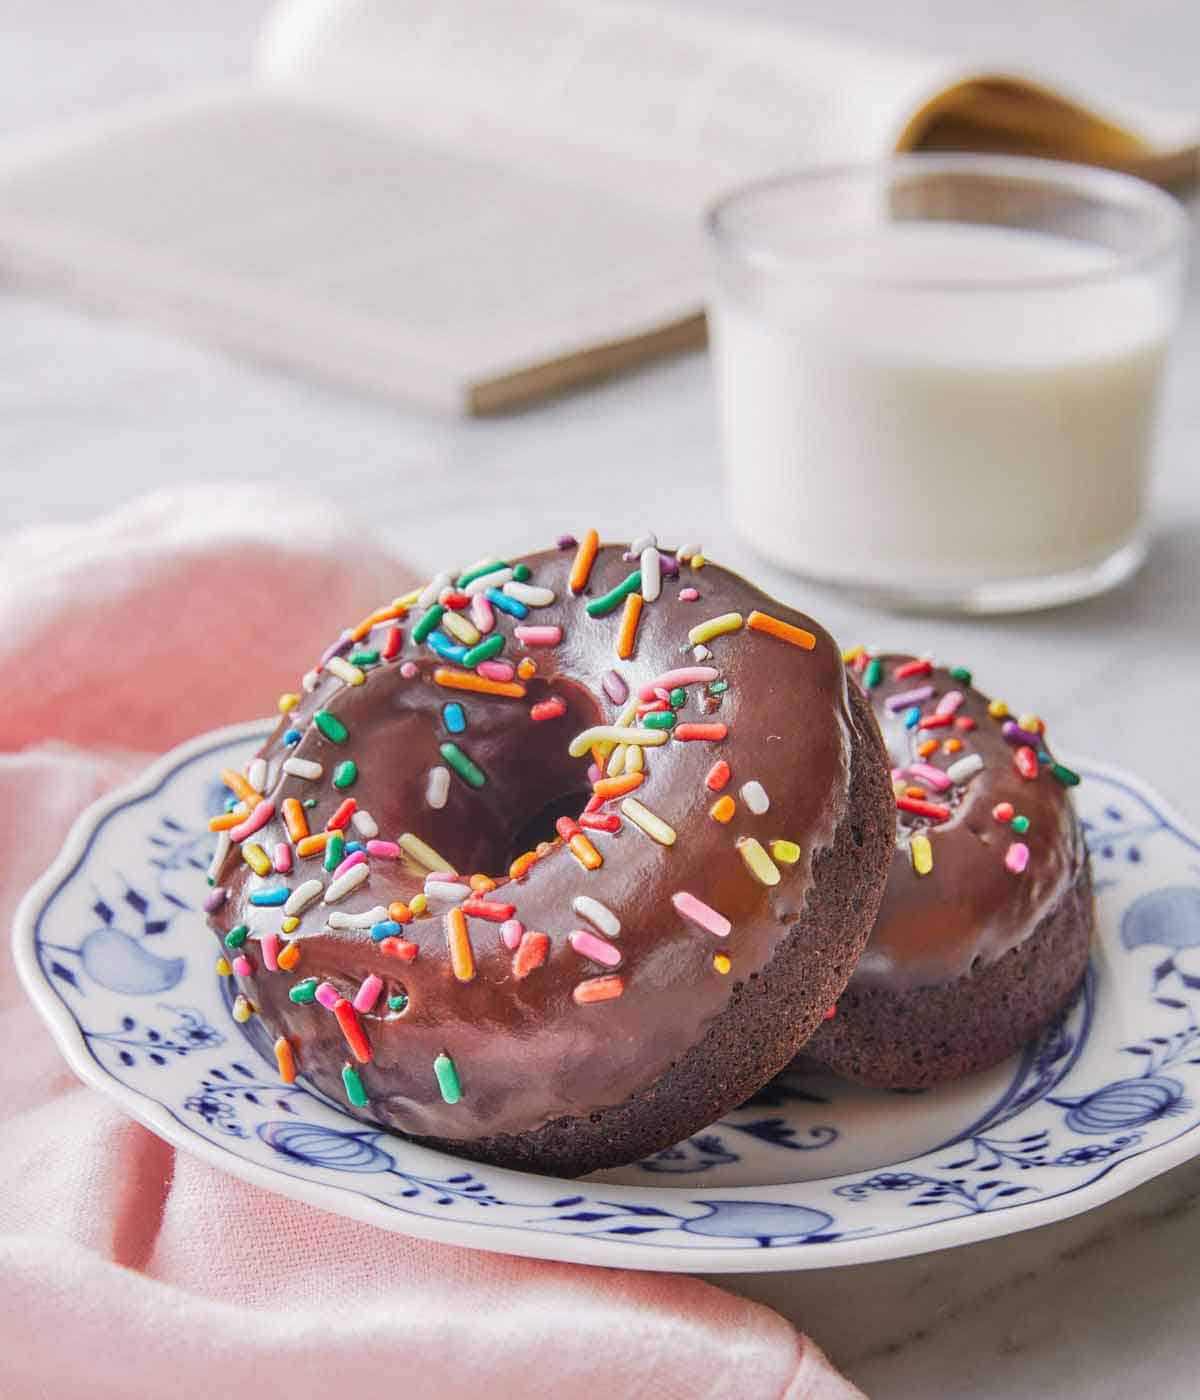 A plate with two chocolate donuts with rainbow sprinkles on the glaze.